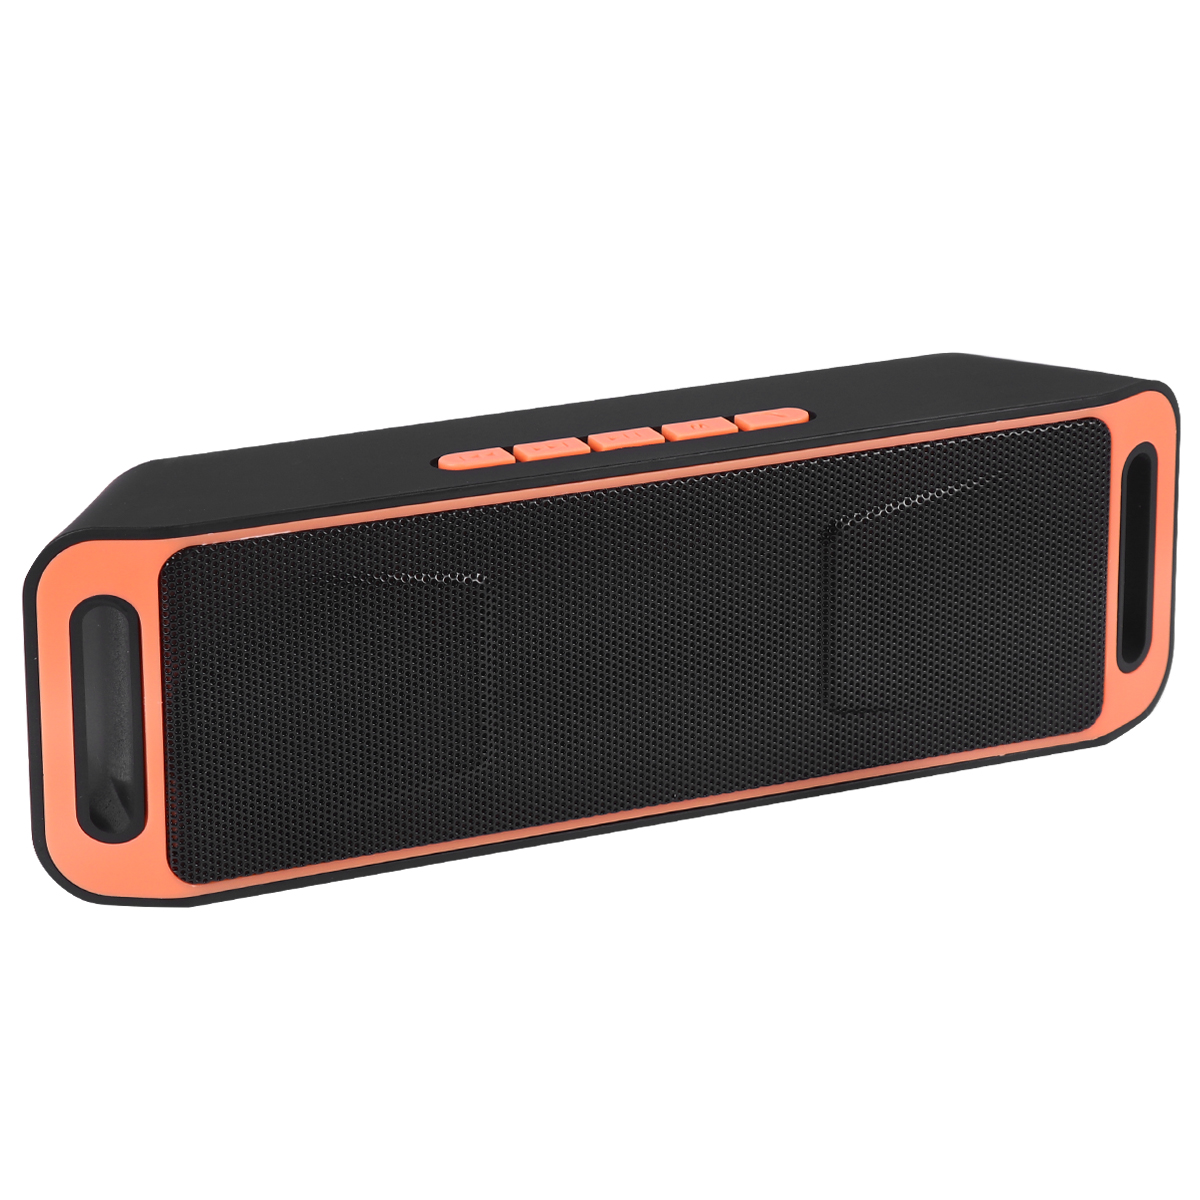 OUNONA Wireless Speaker Mini Portable Computer Speaker Multi-purpose Speaker Outdoor Wireless Speaker Dual Horn Subwoofer Stereo for Outdoor Office Store - image 3 of 5